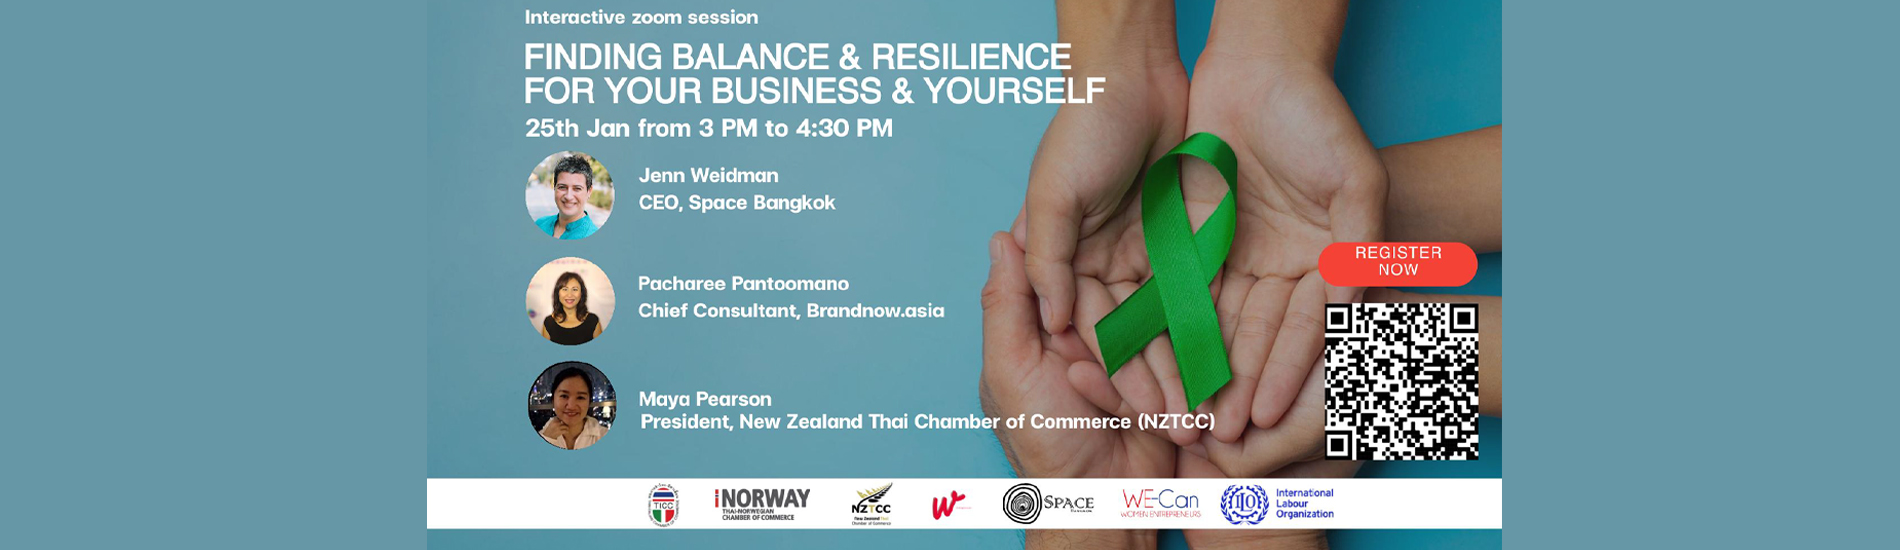 Finding Balance & Resilience for Your Business & Yourself